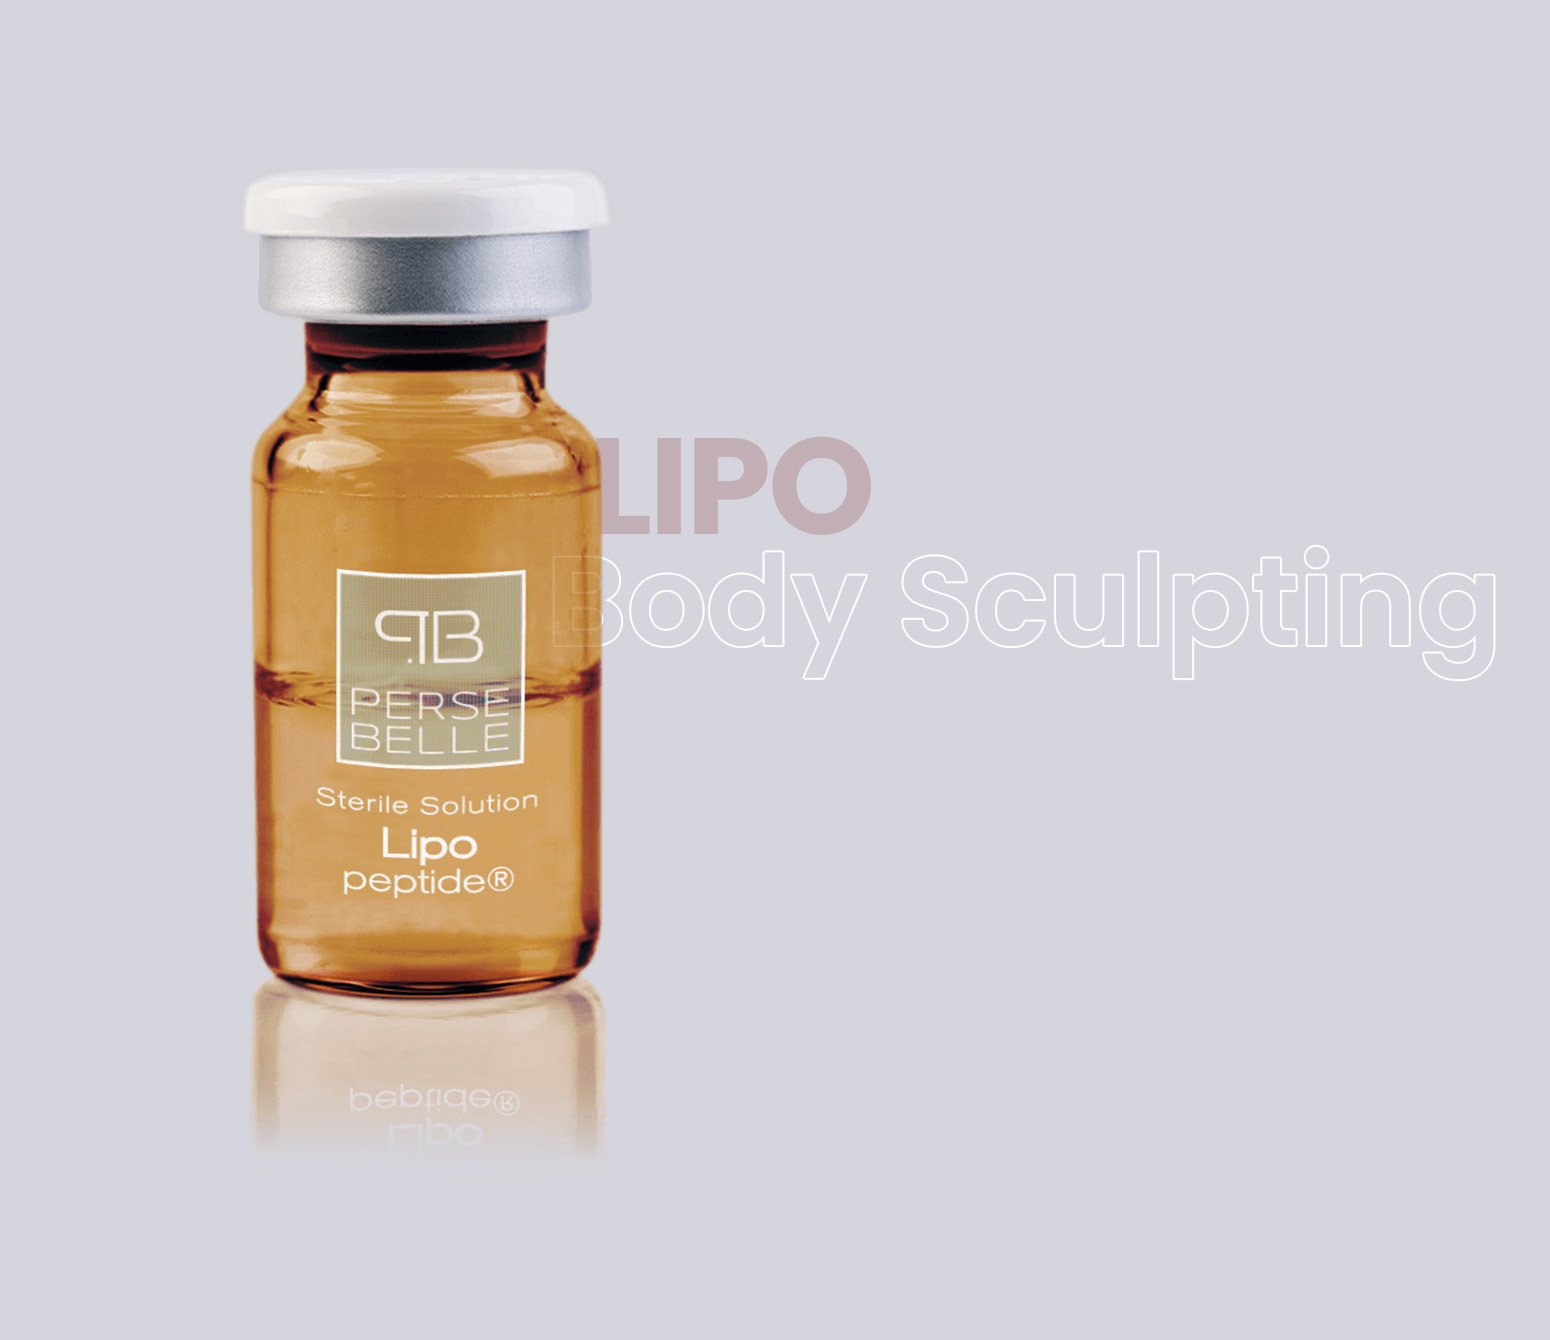 Lipolytic peptide mesotherapy - Treatment to reduce body fat - Persebelle